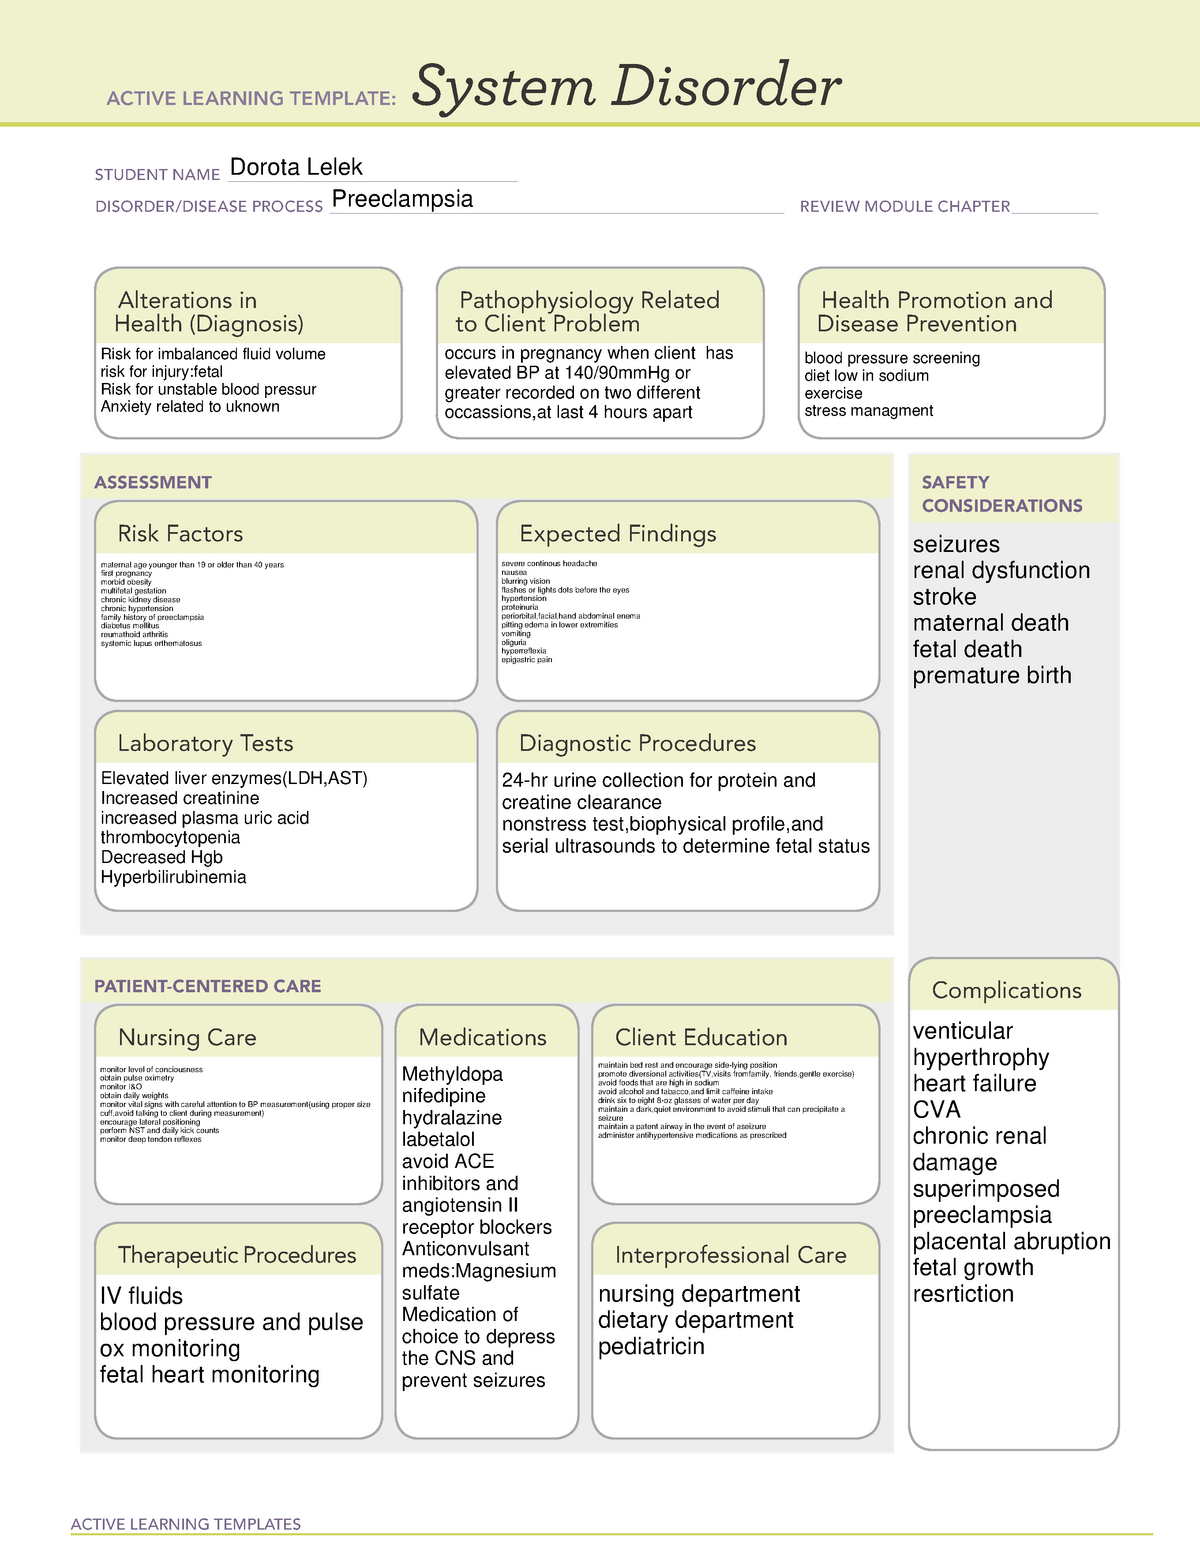 System Disorder Template Atipreeclamsia ACTIVE LEARNING TEMPLATES